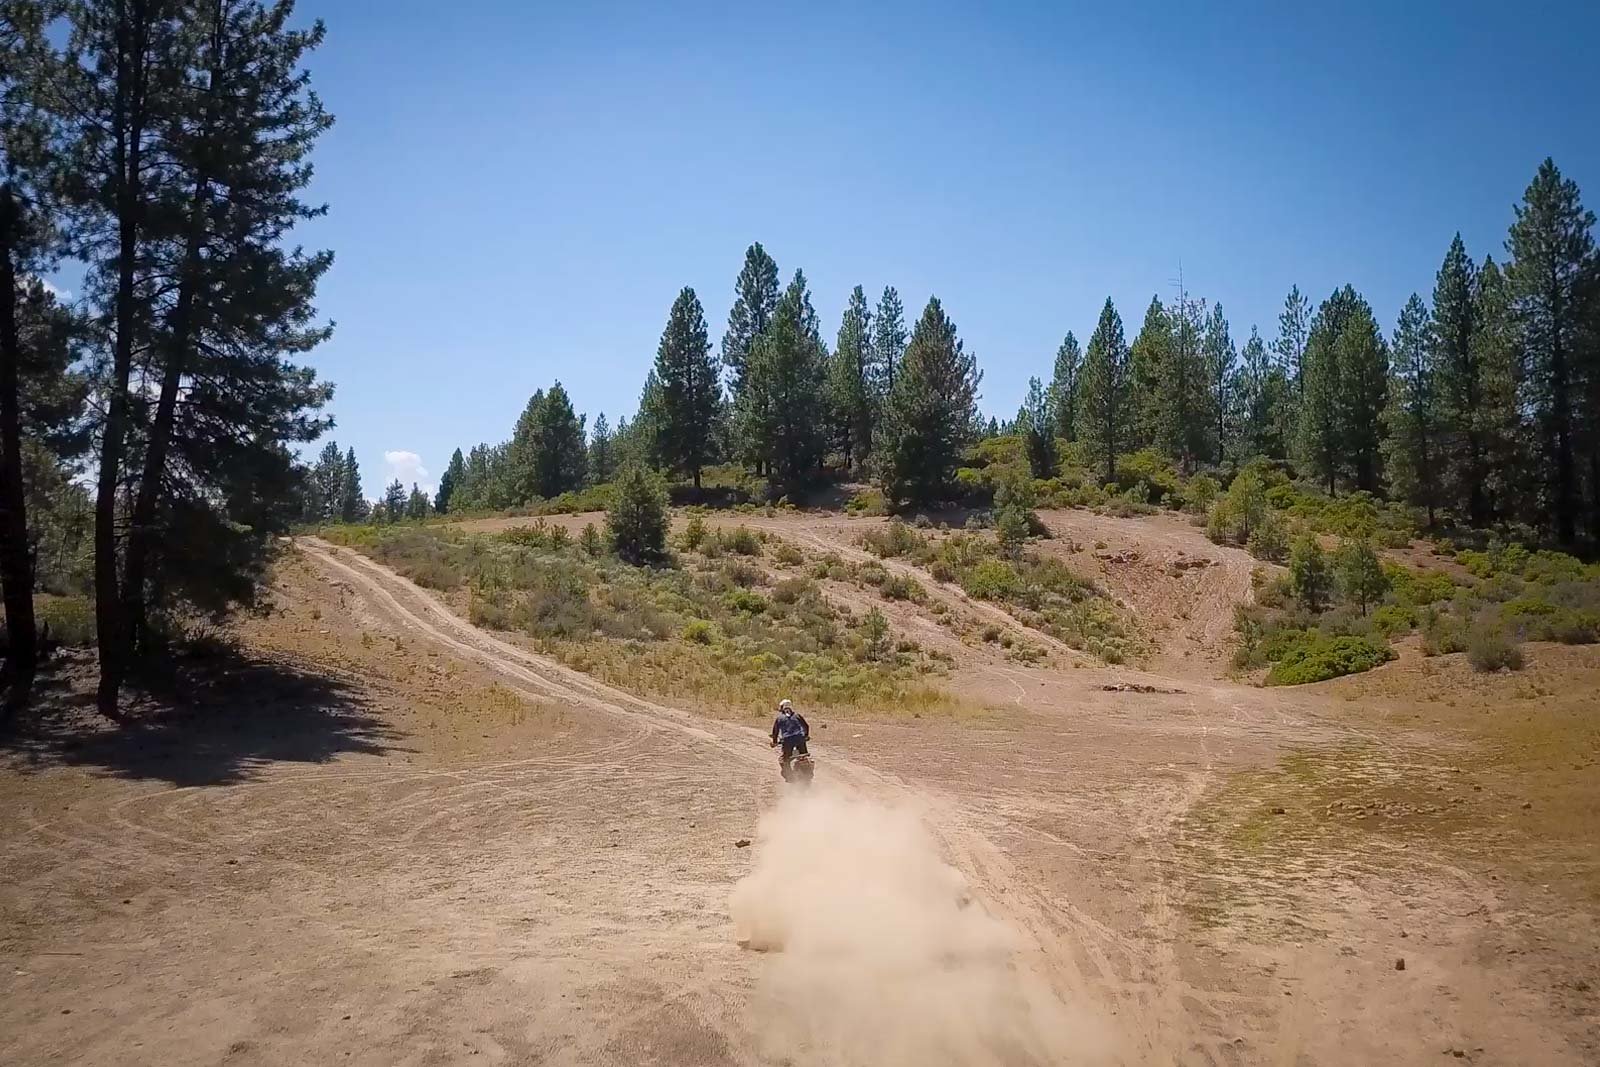 Eric rippin' the trails on the KTM 790 Adventure S in Oregon's backcountry